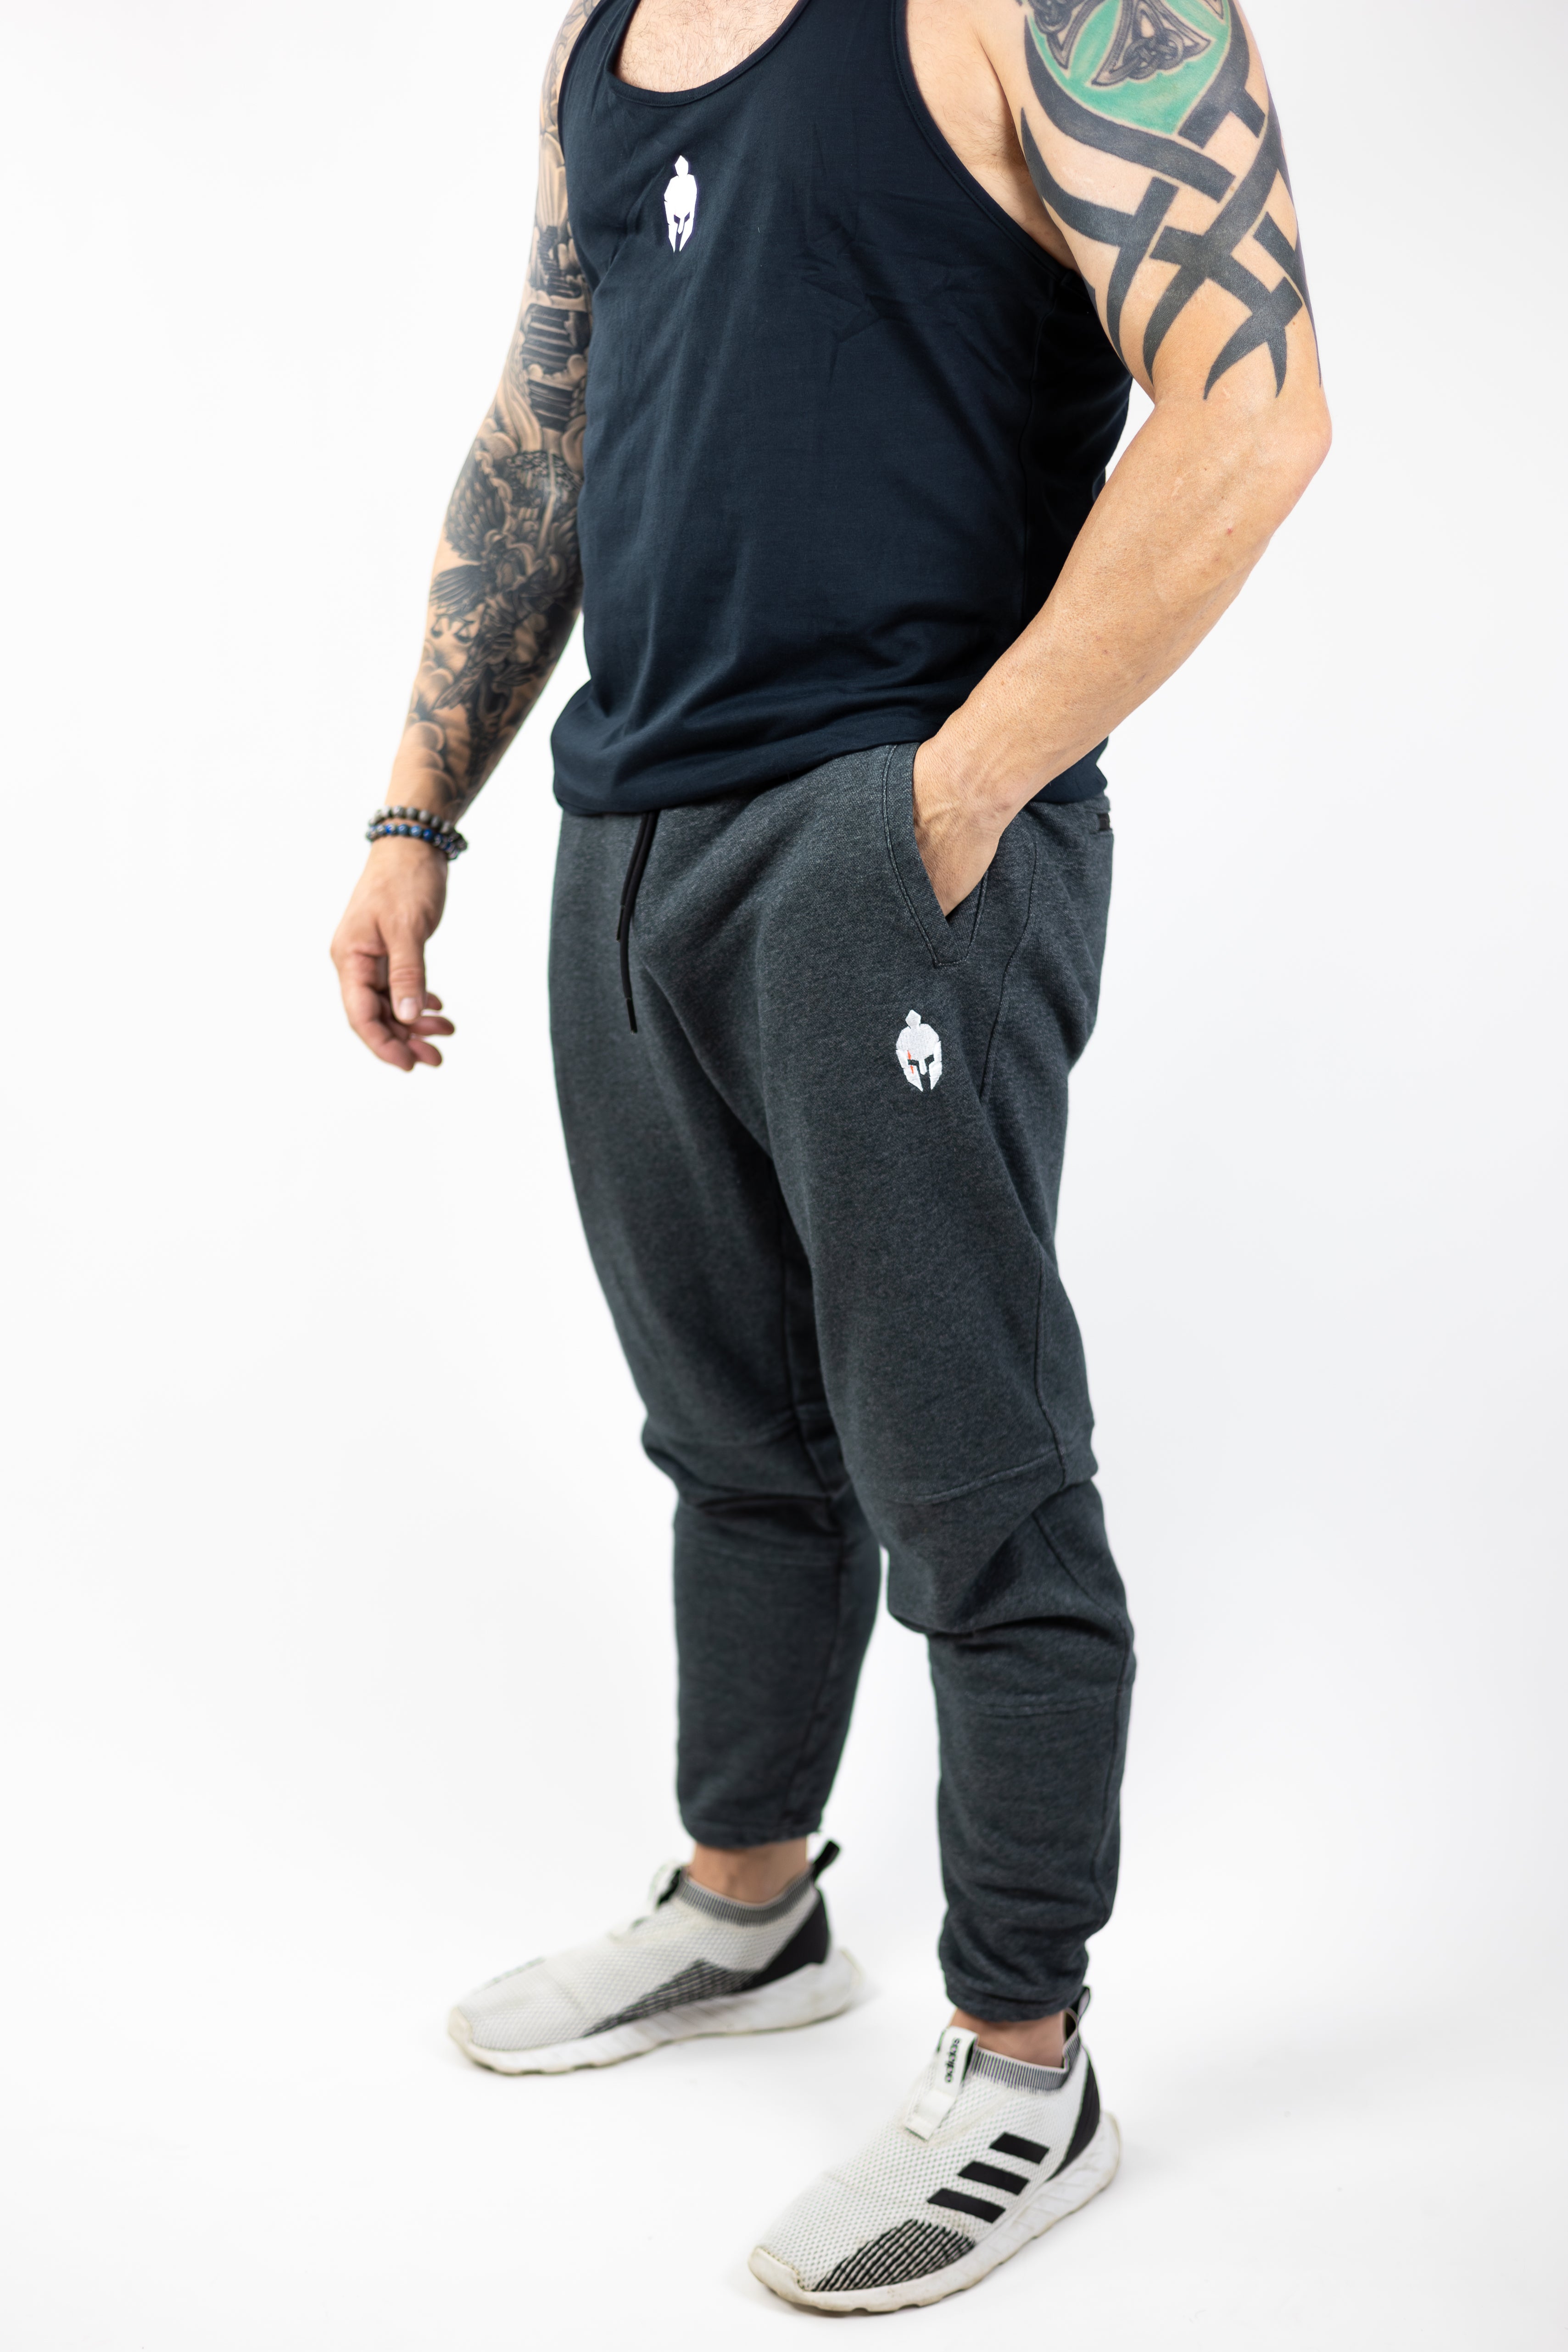 man modeling Strength of One gray sweatpants with embroidered helmet logo at top right hip and Strength of One logo vertical down left lower leg